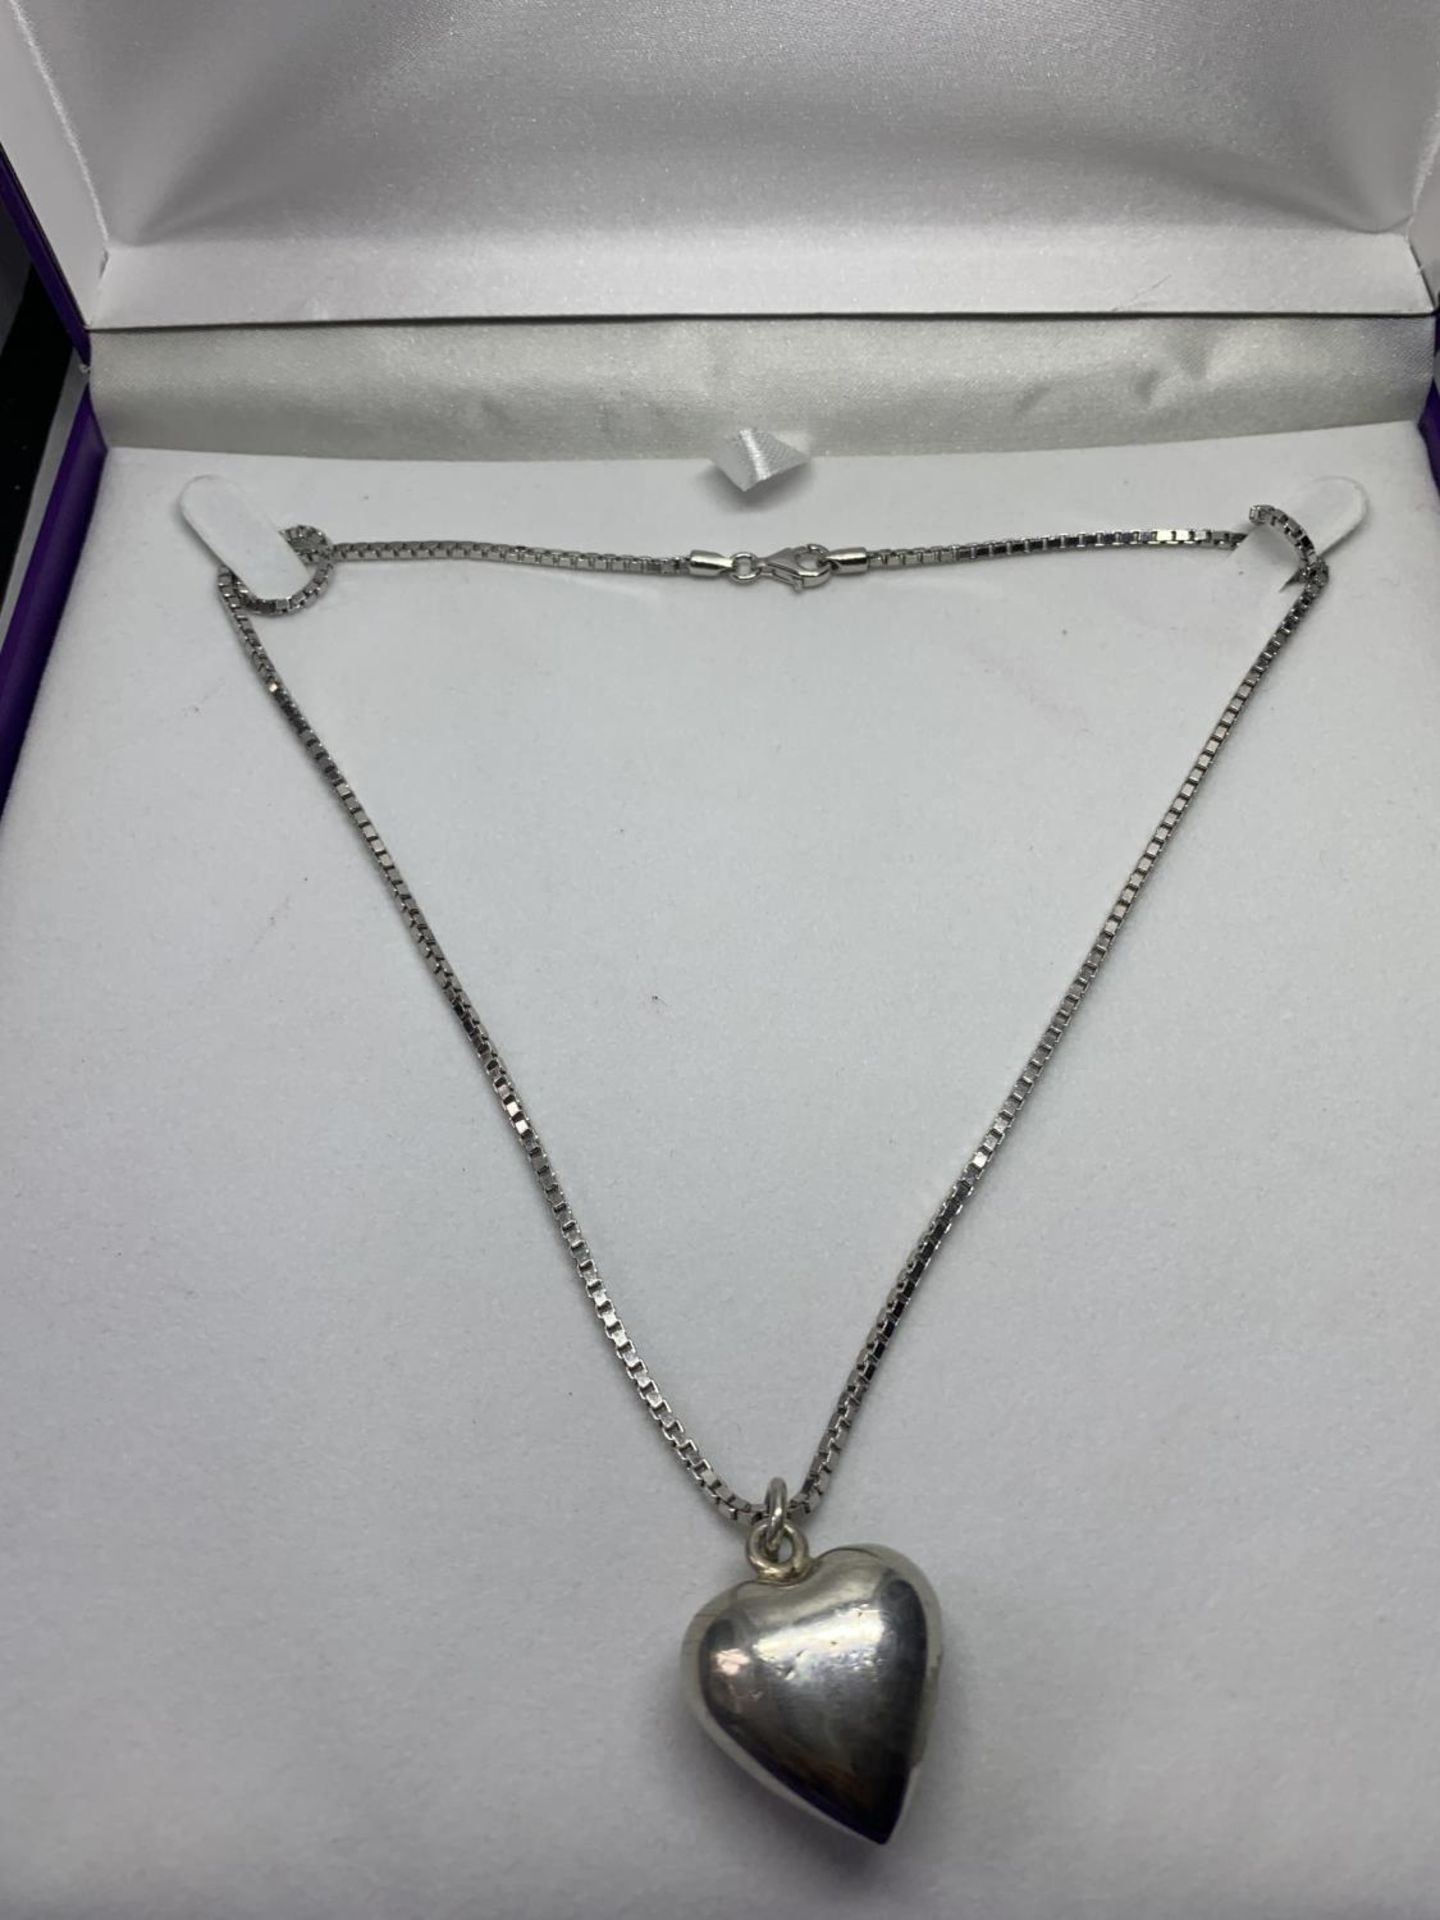 A SILVER NECKLACE WITH A HEART PENDANT IN A PRESENTATION BOX